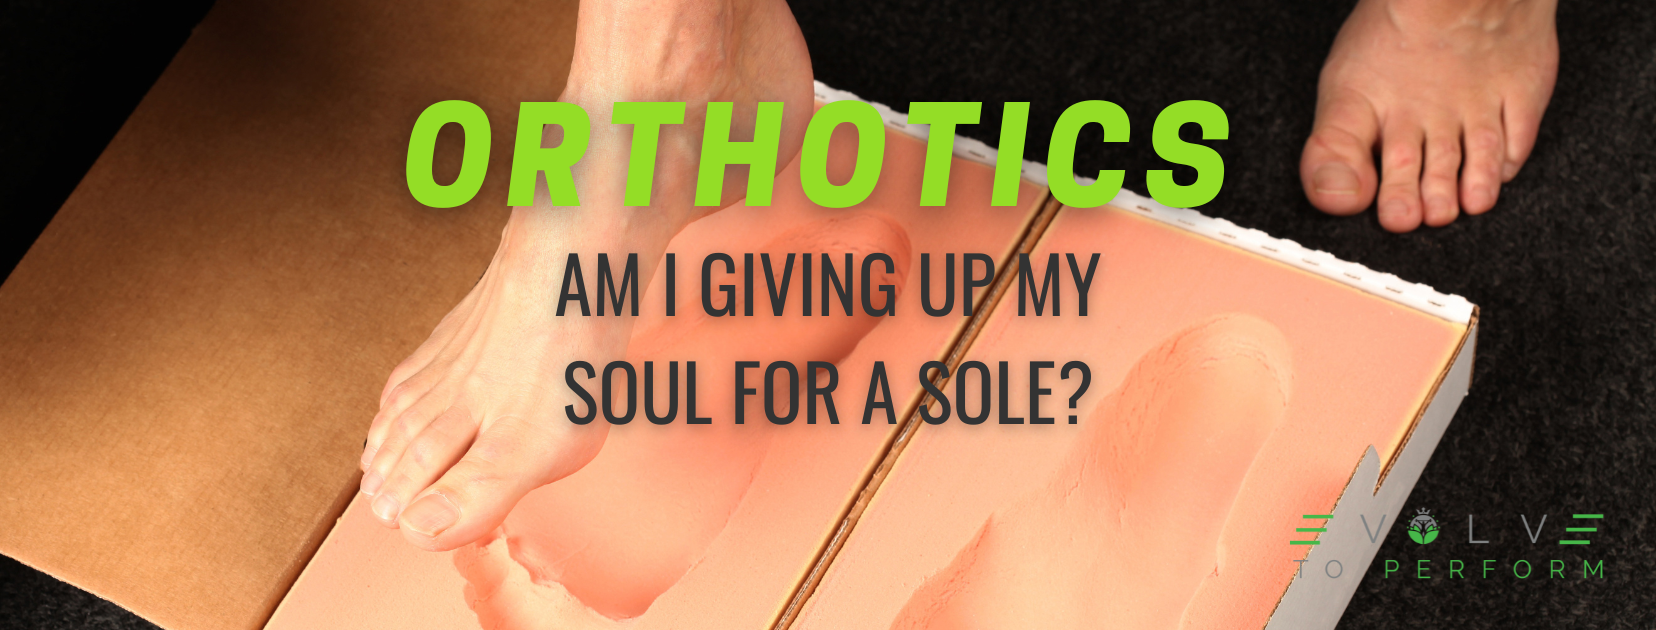 Orthotics: Am I Giving Up a Soul For a Sole?